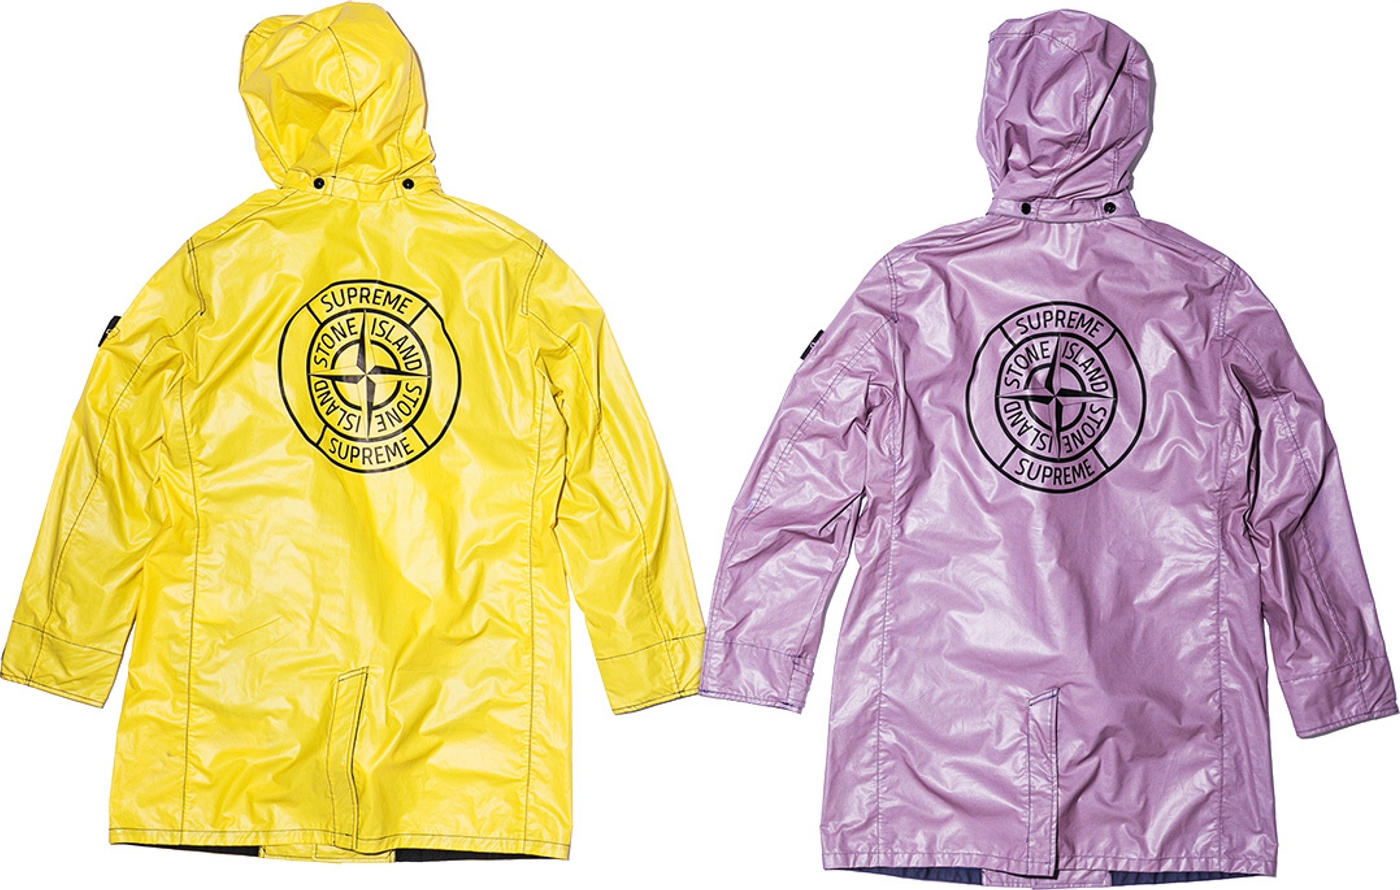 Water resistant thermosensitive Heat Reactive polyurethane coated cotton fabric with removable hood. (12/24)